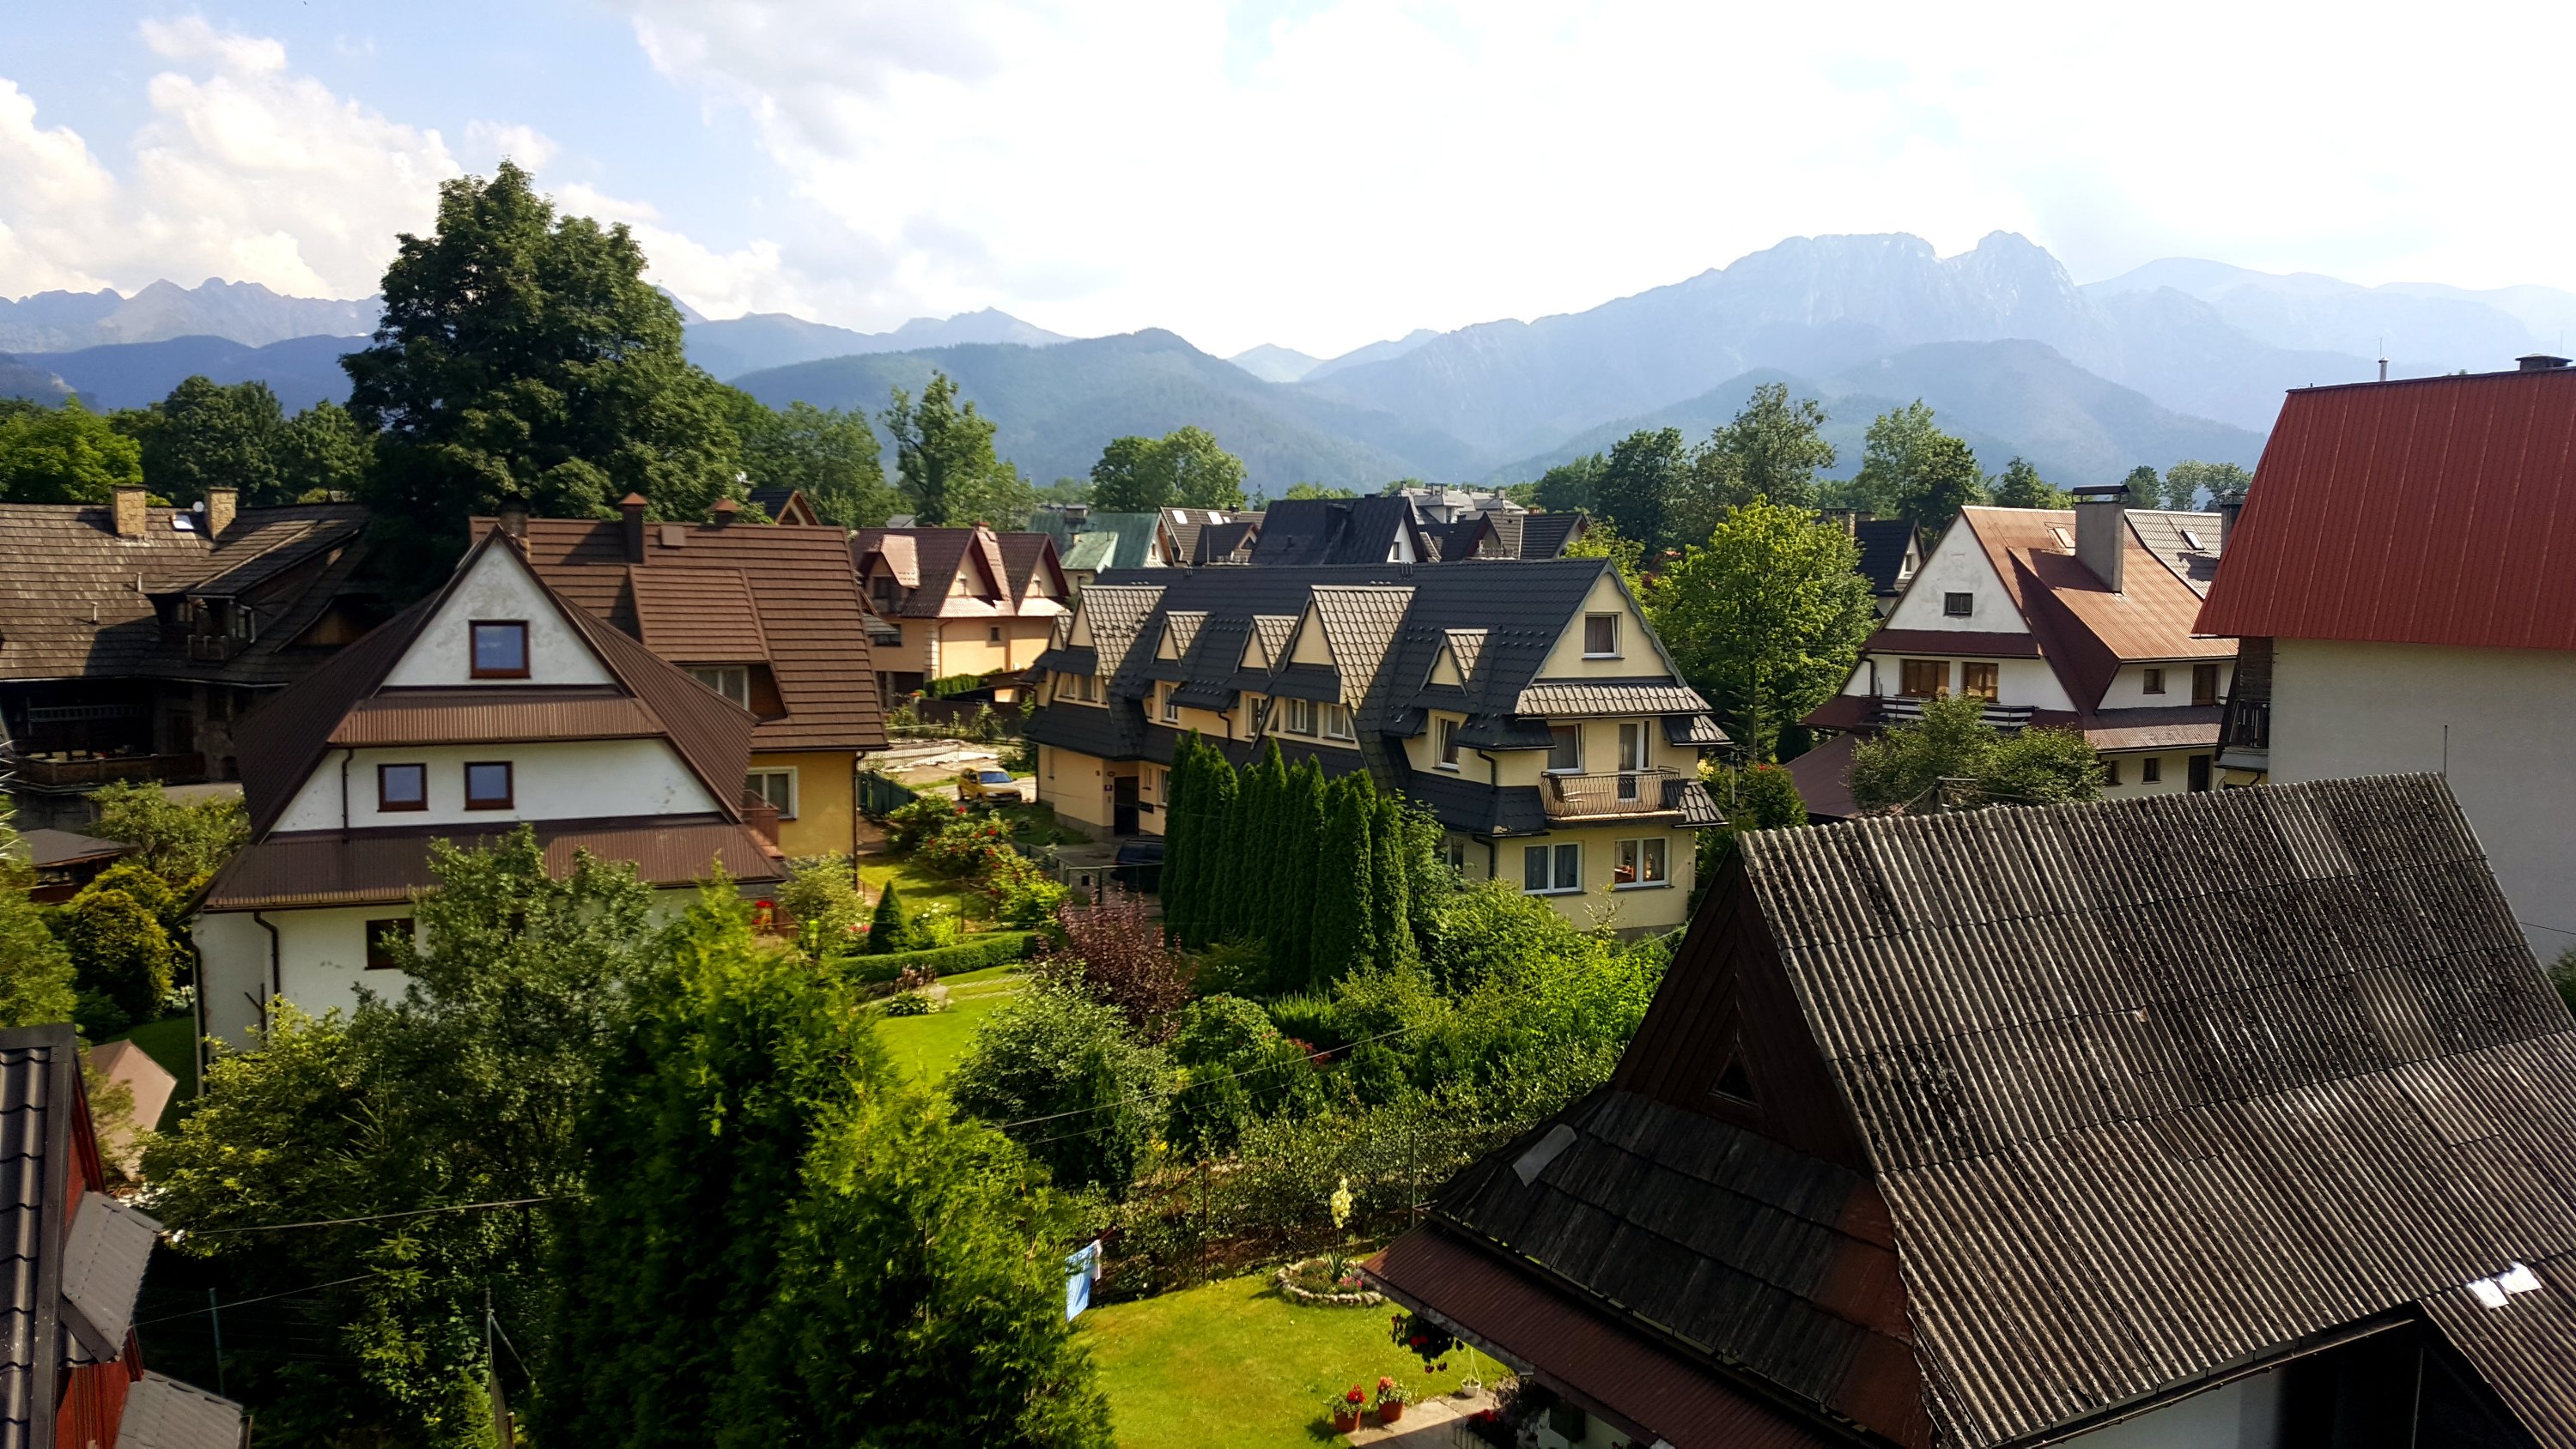 View from our AirBnB apartment in Zakopane. 